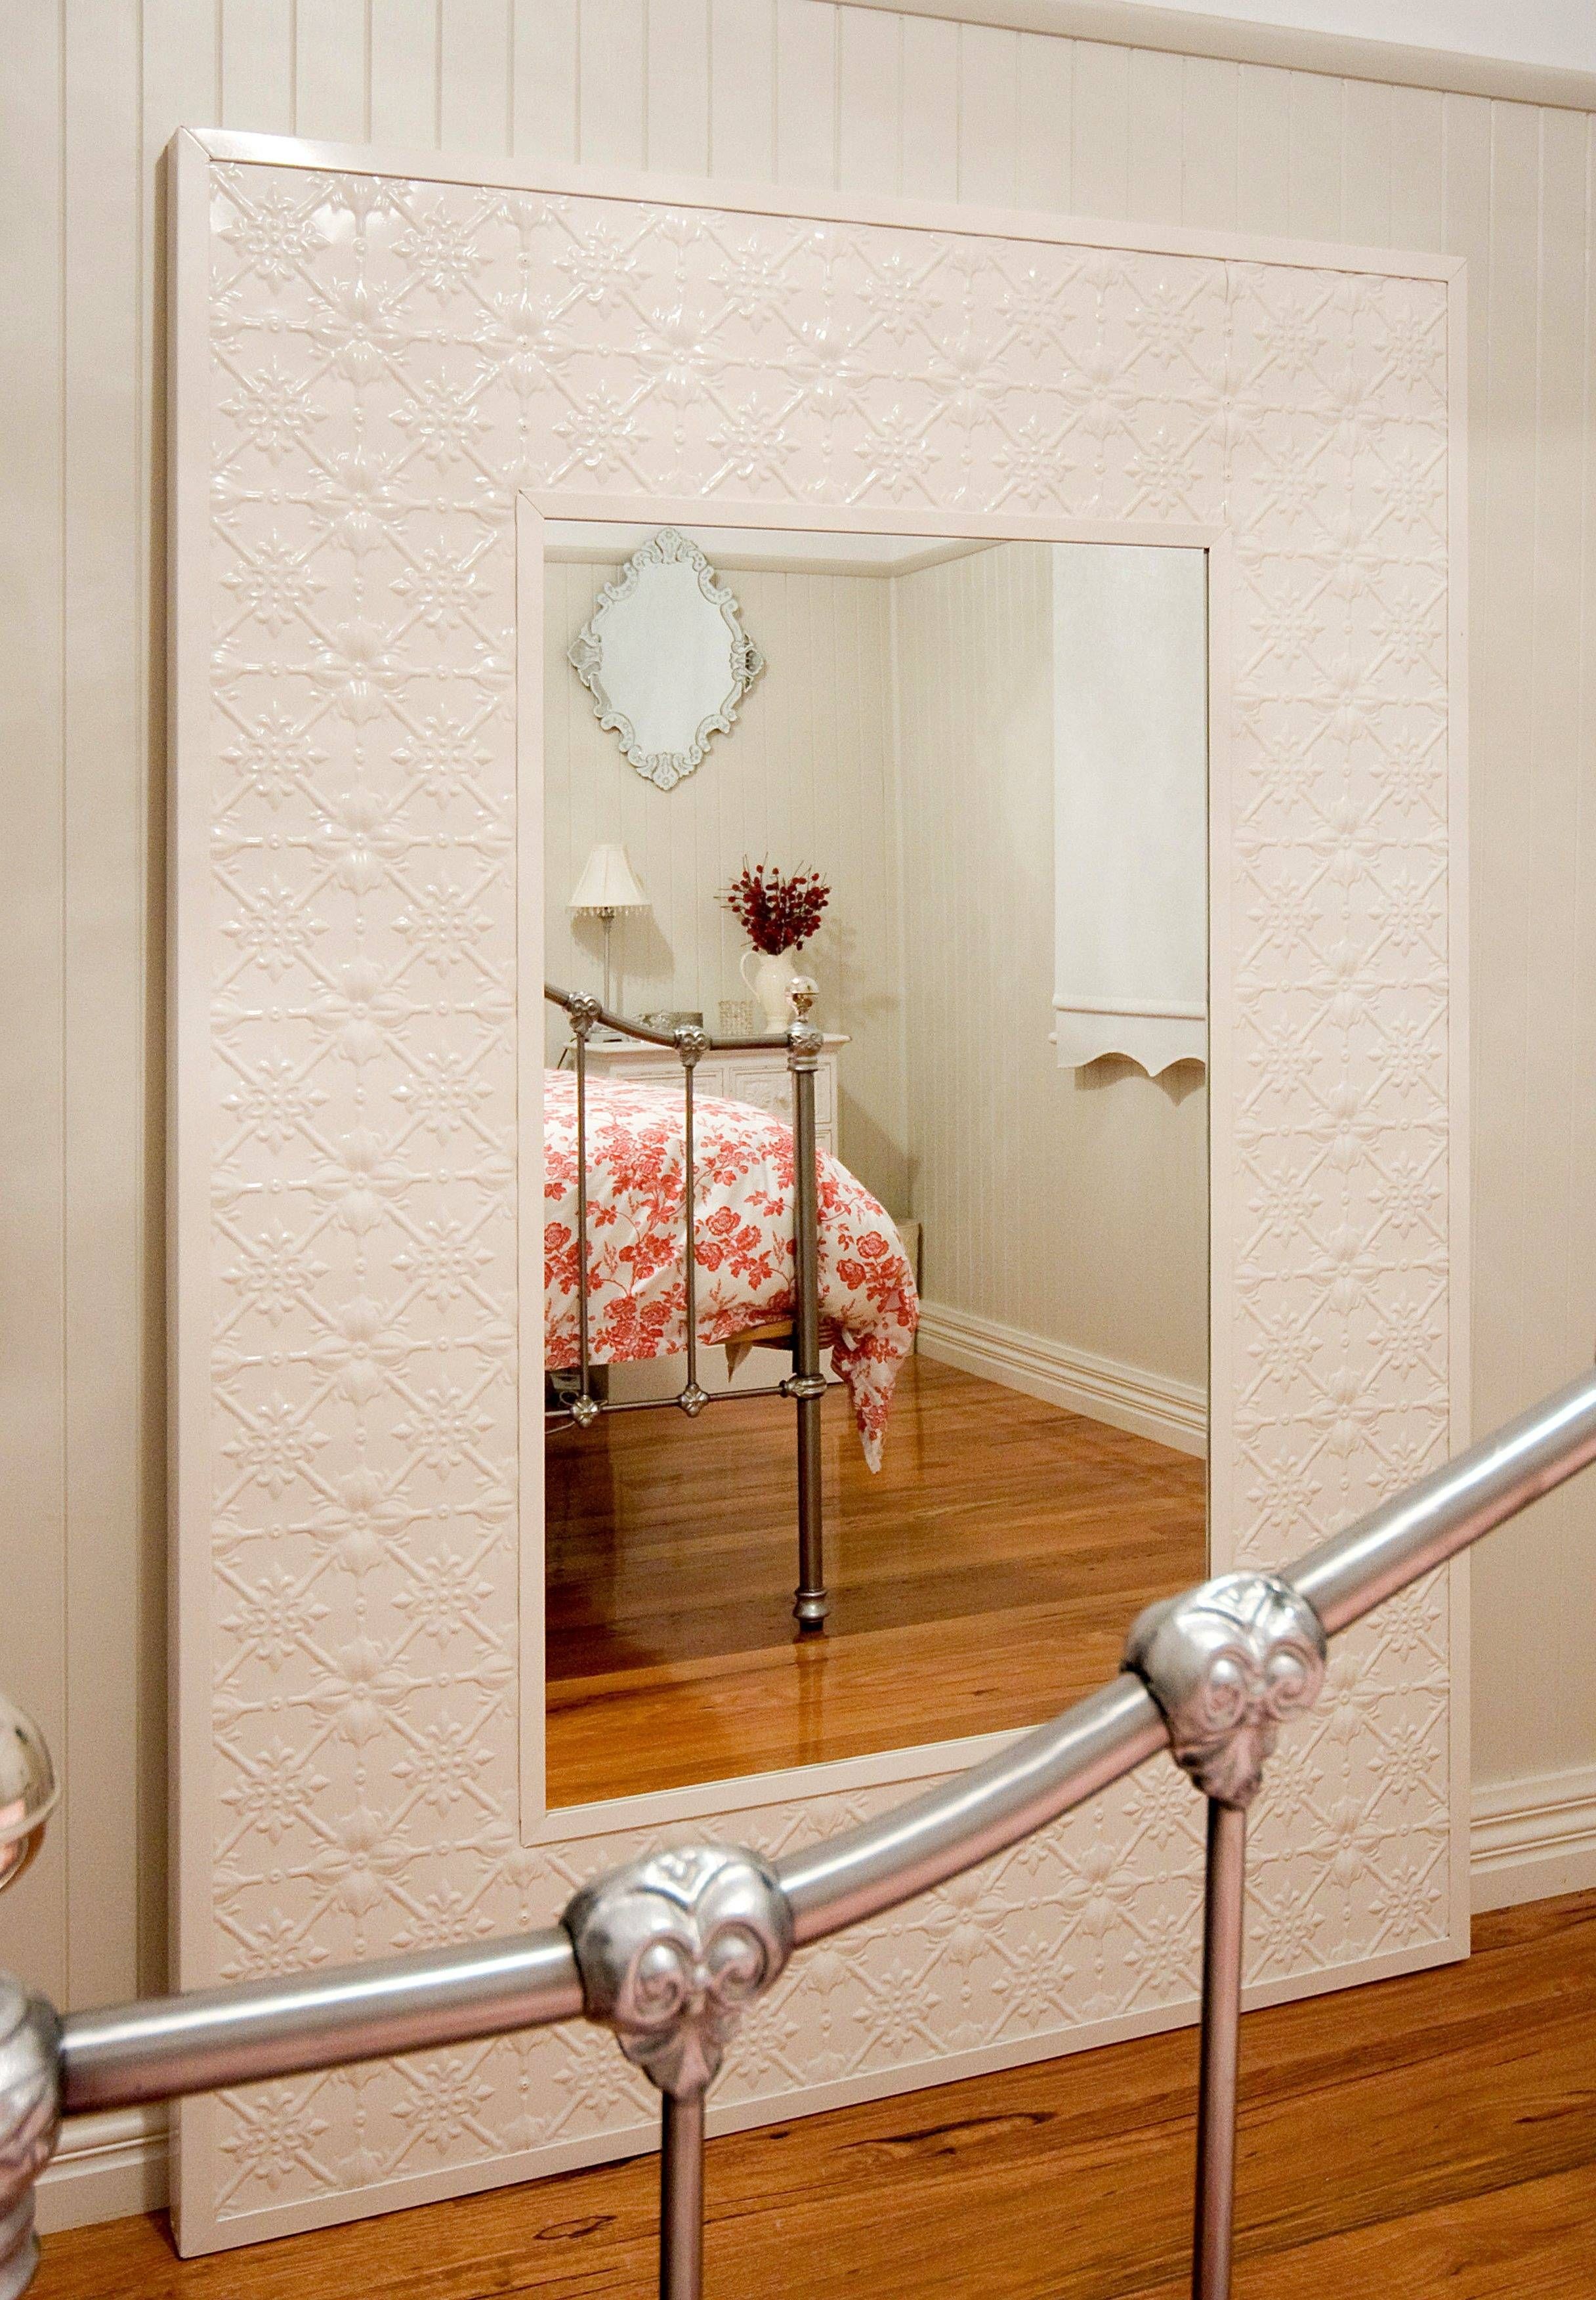 Pressed Tin Mirrors Intended For Pressed Tin Mirrors (View 4 of 25)